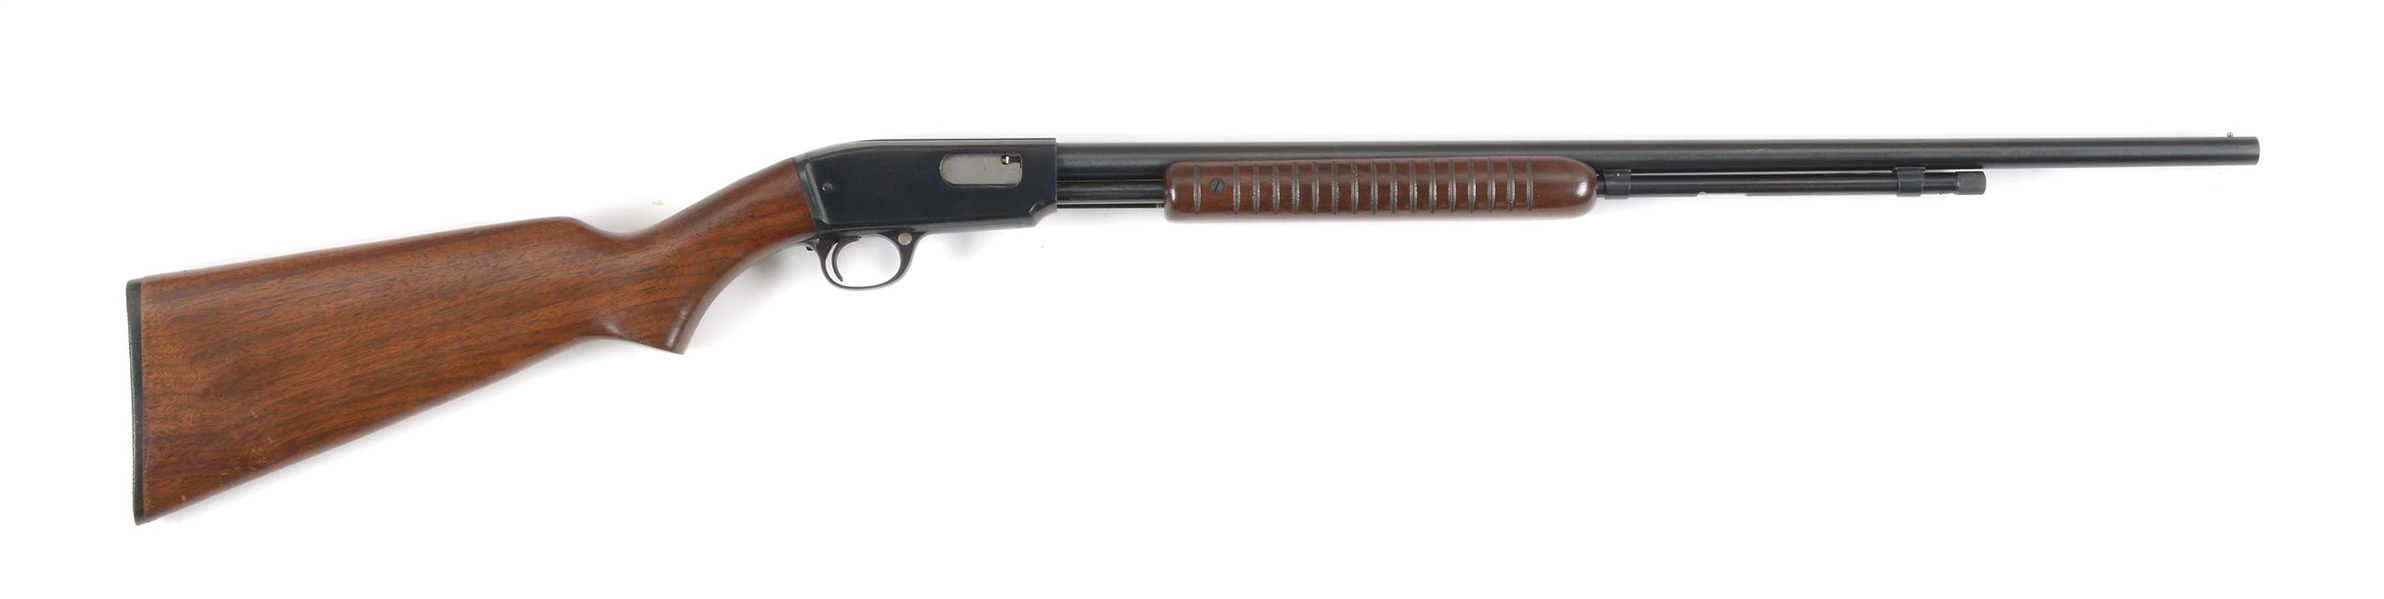 (C) WINCHESTER 61 .22 LONG SLIDE ACTION RIFLE